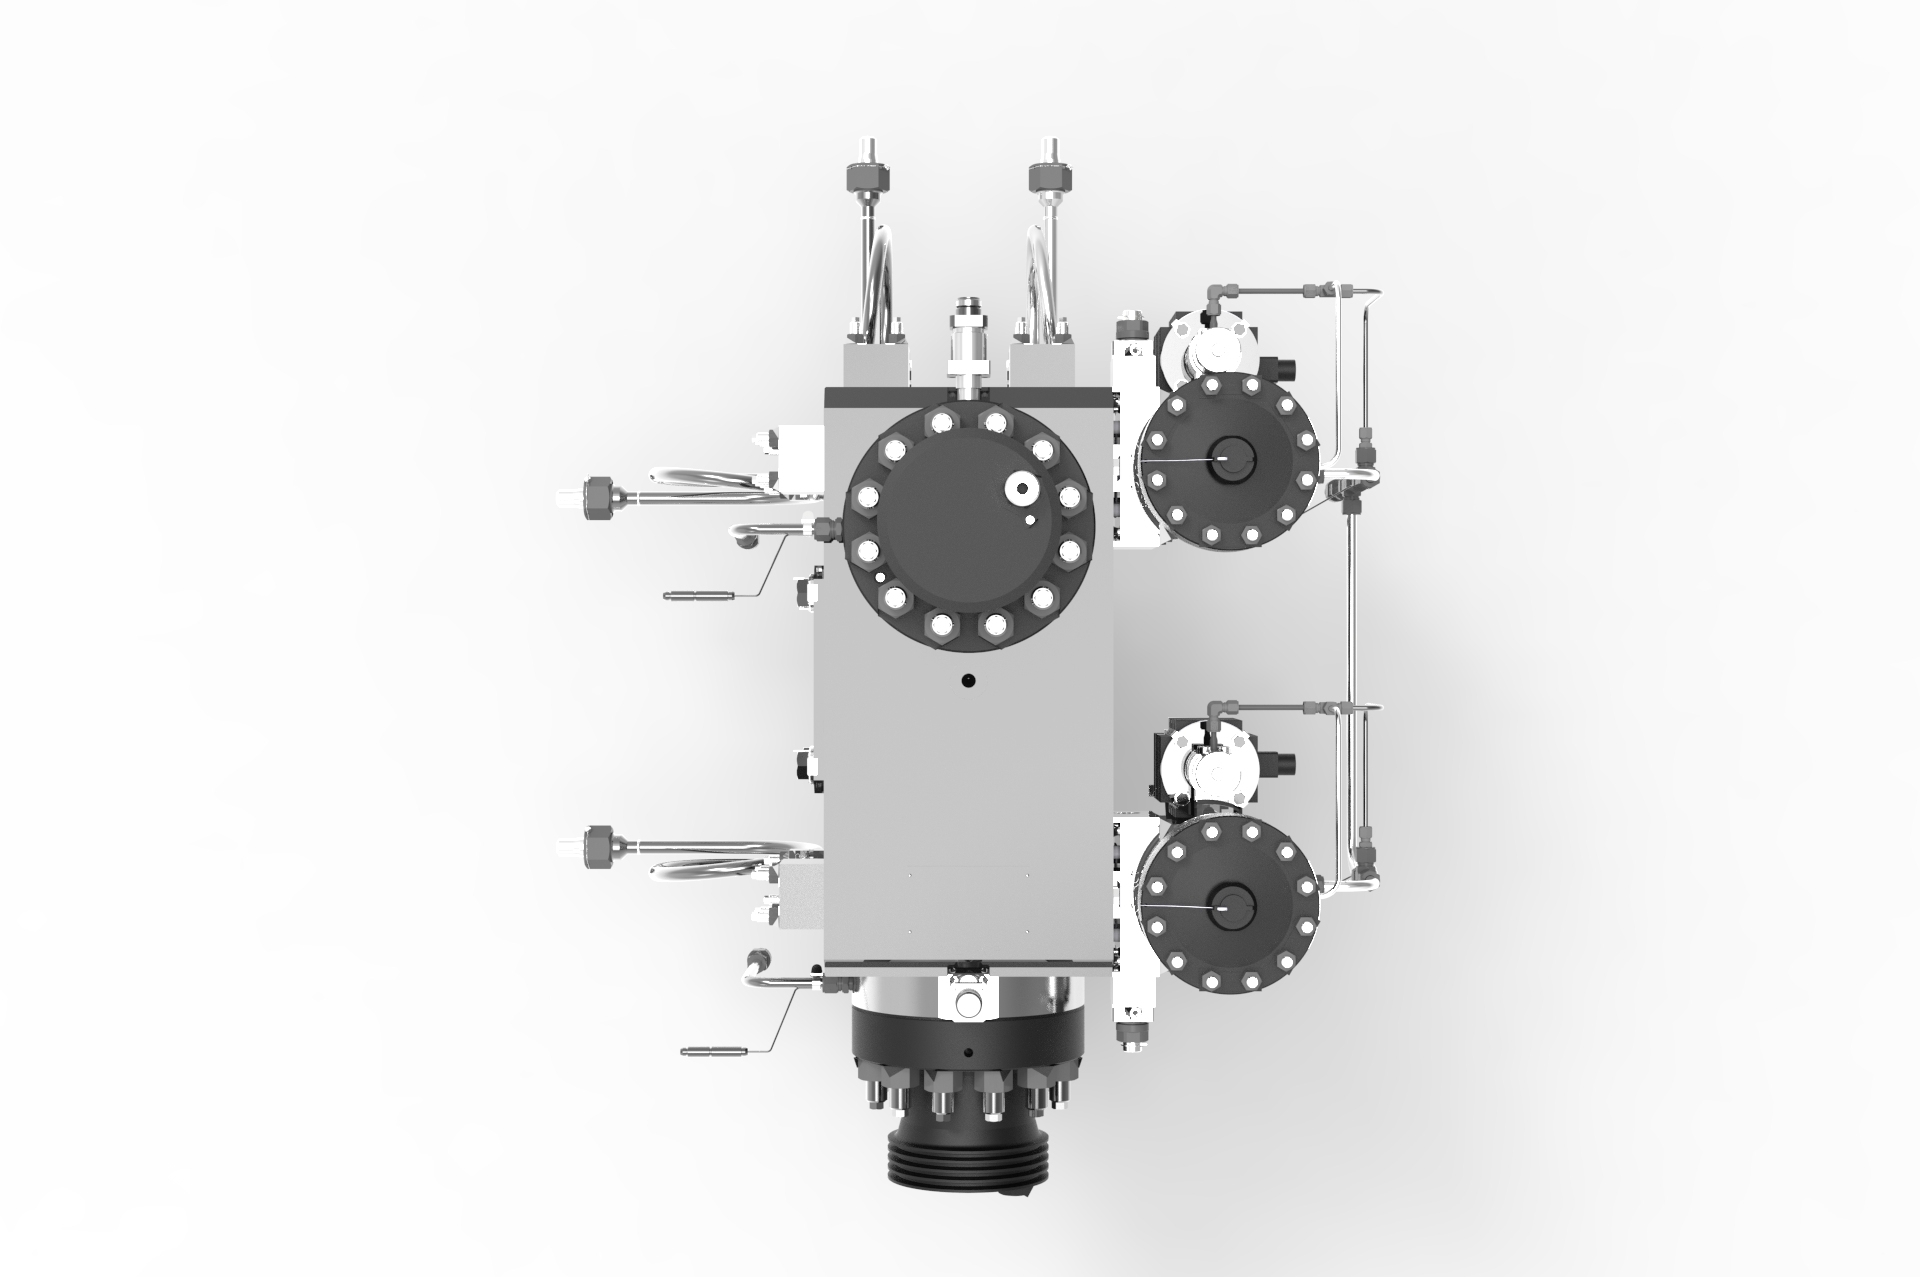 Top view of a SEBIM CTSV 3000 Compact Tandem Safety Valves manufactured by Trillium Flow Technologies